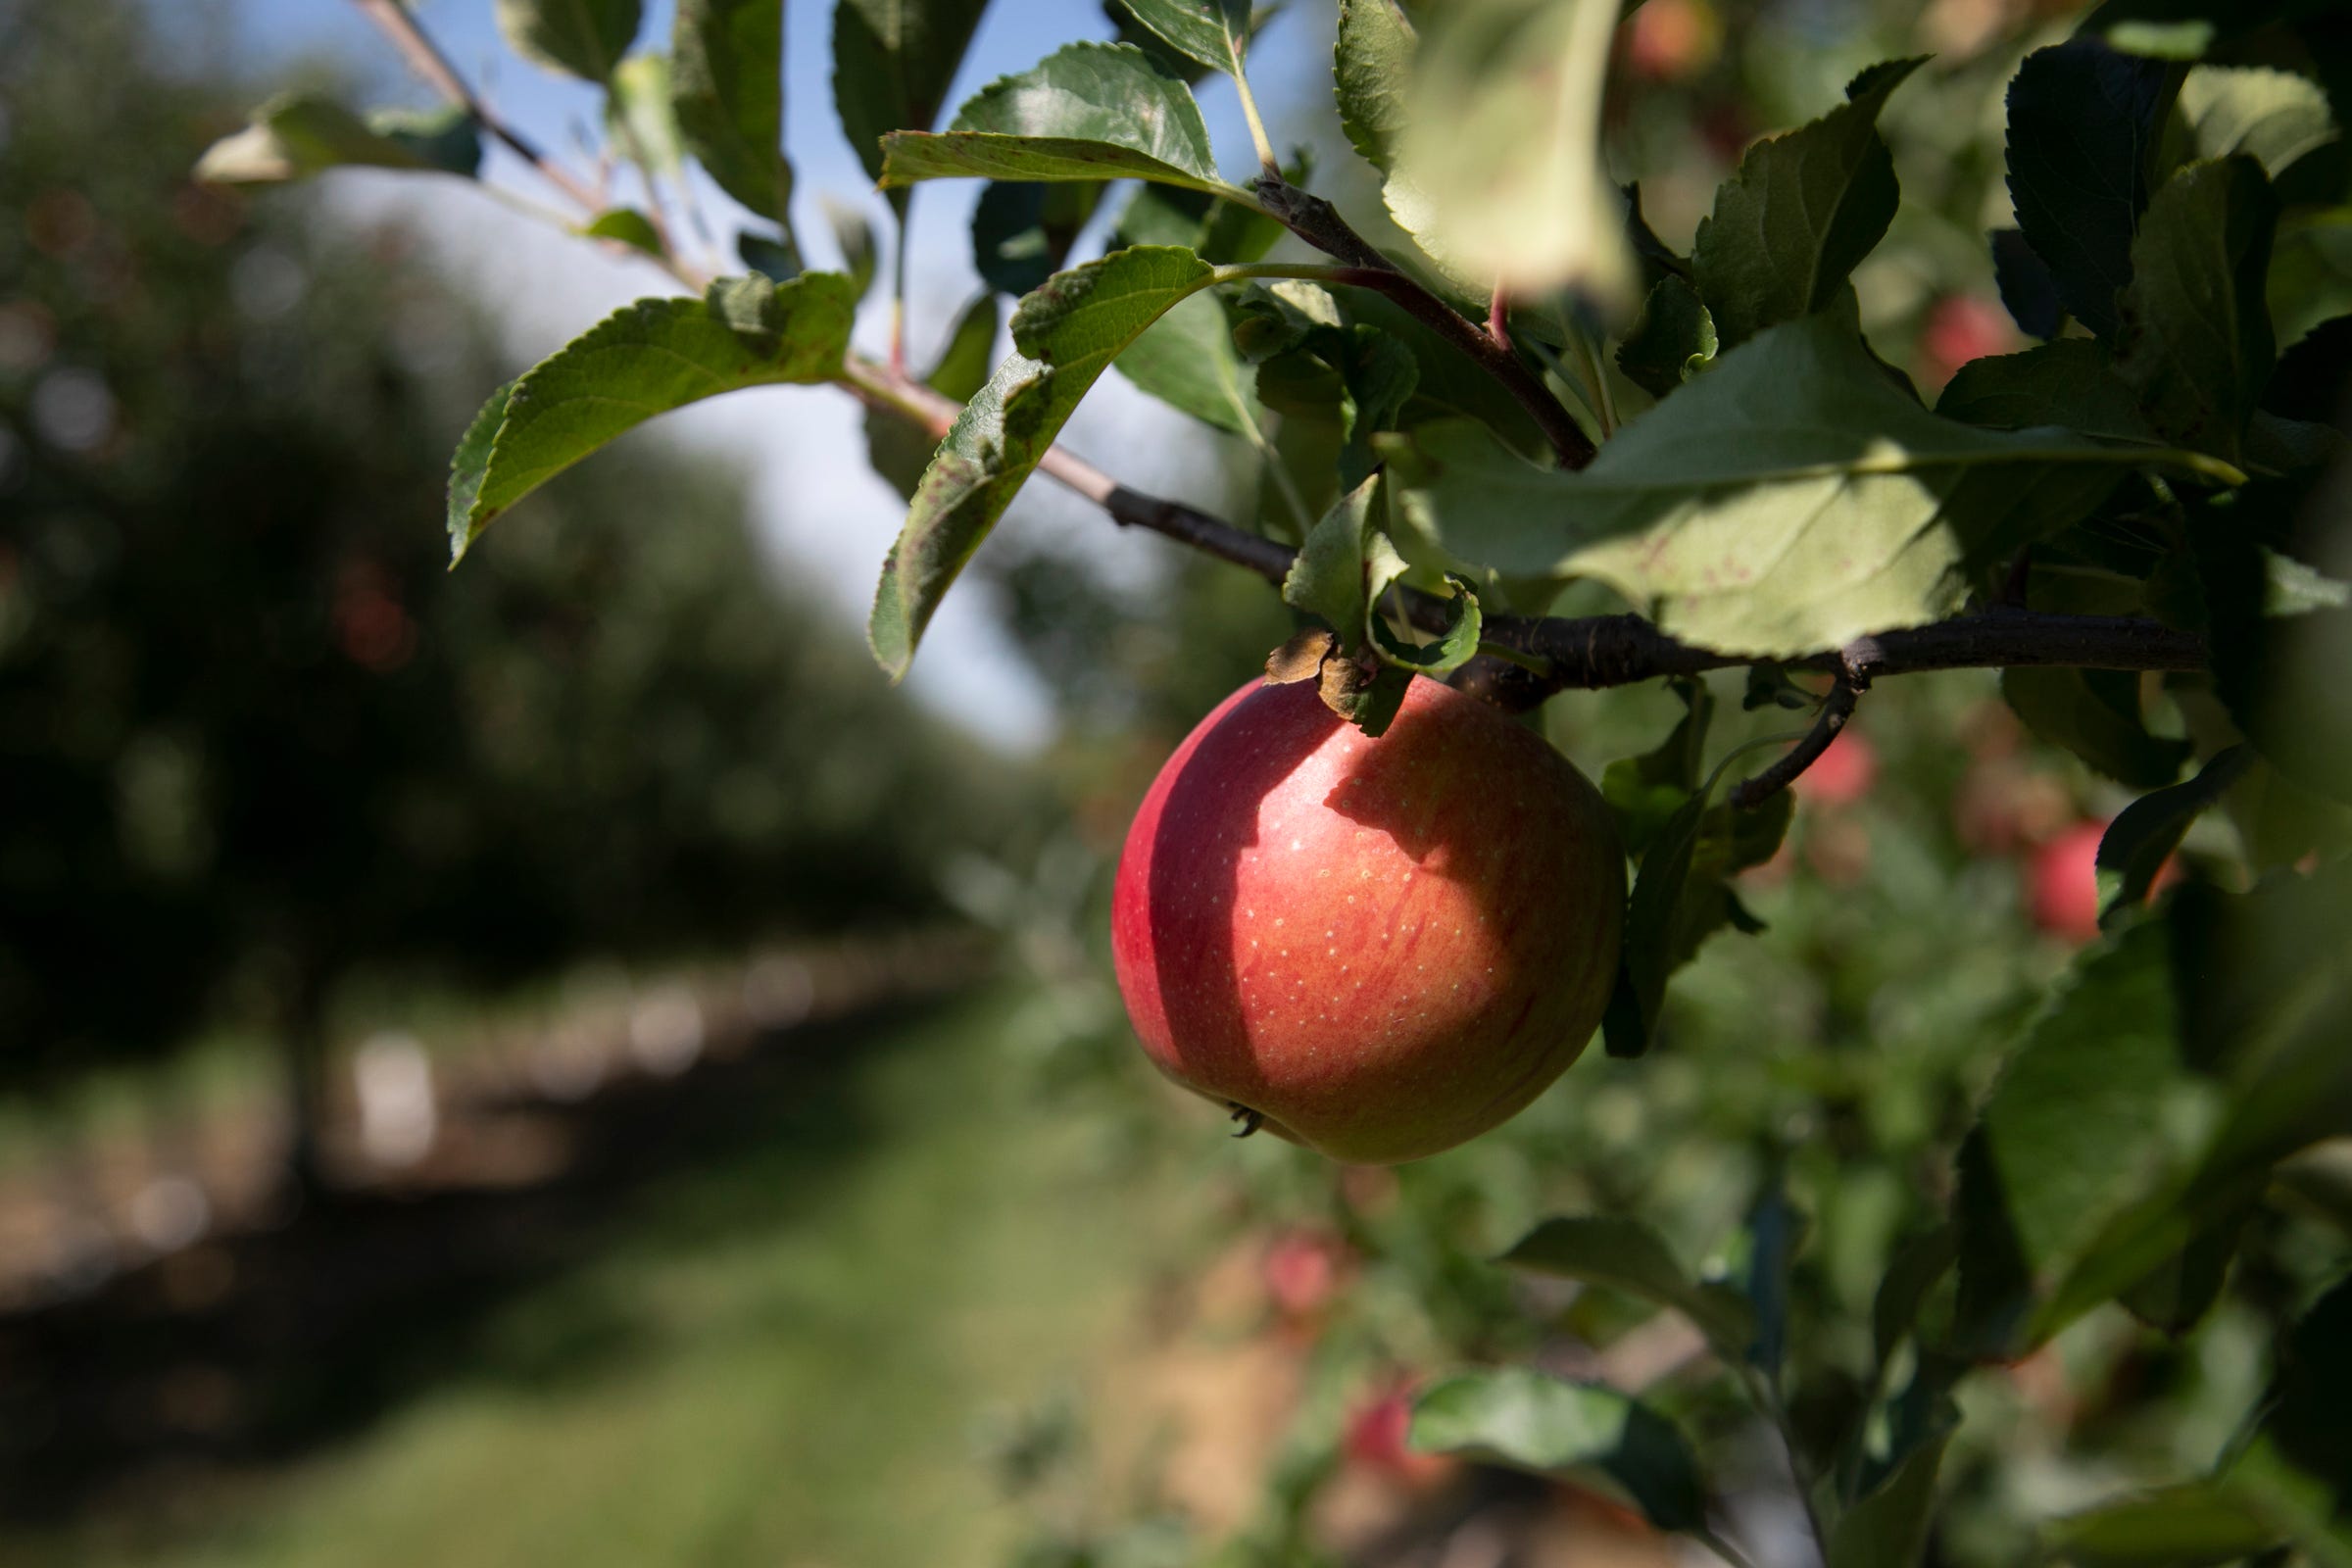 Gala apples are nearly ready for picking in August near Grand Rapids.